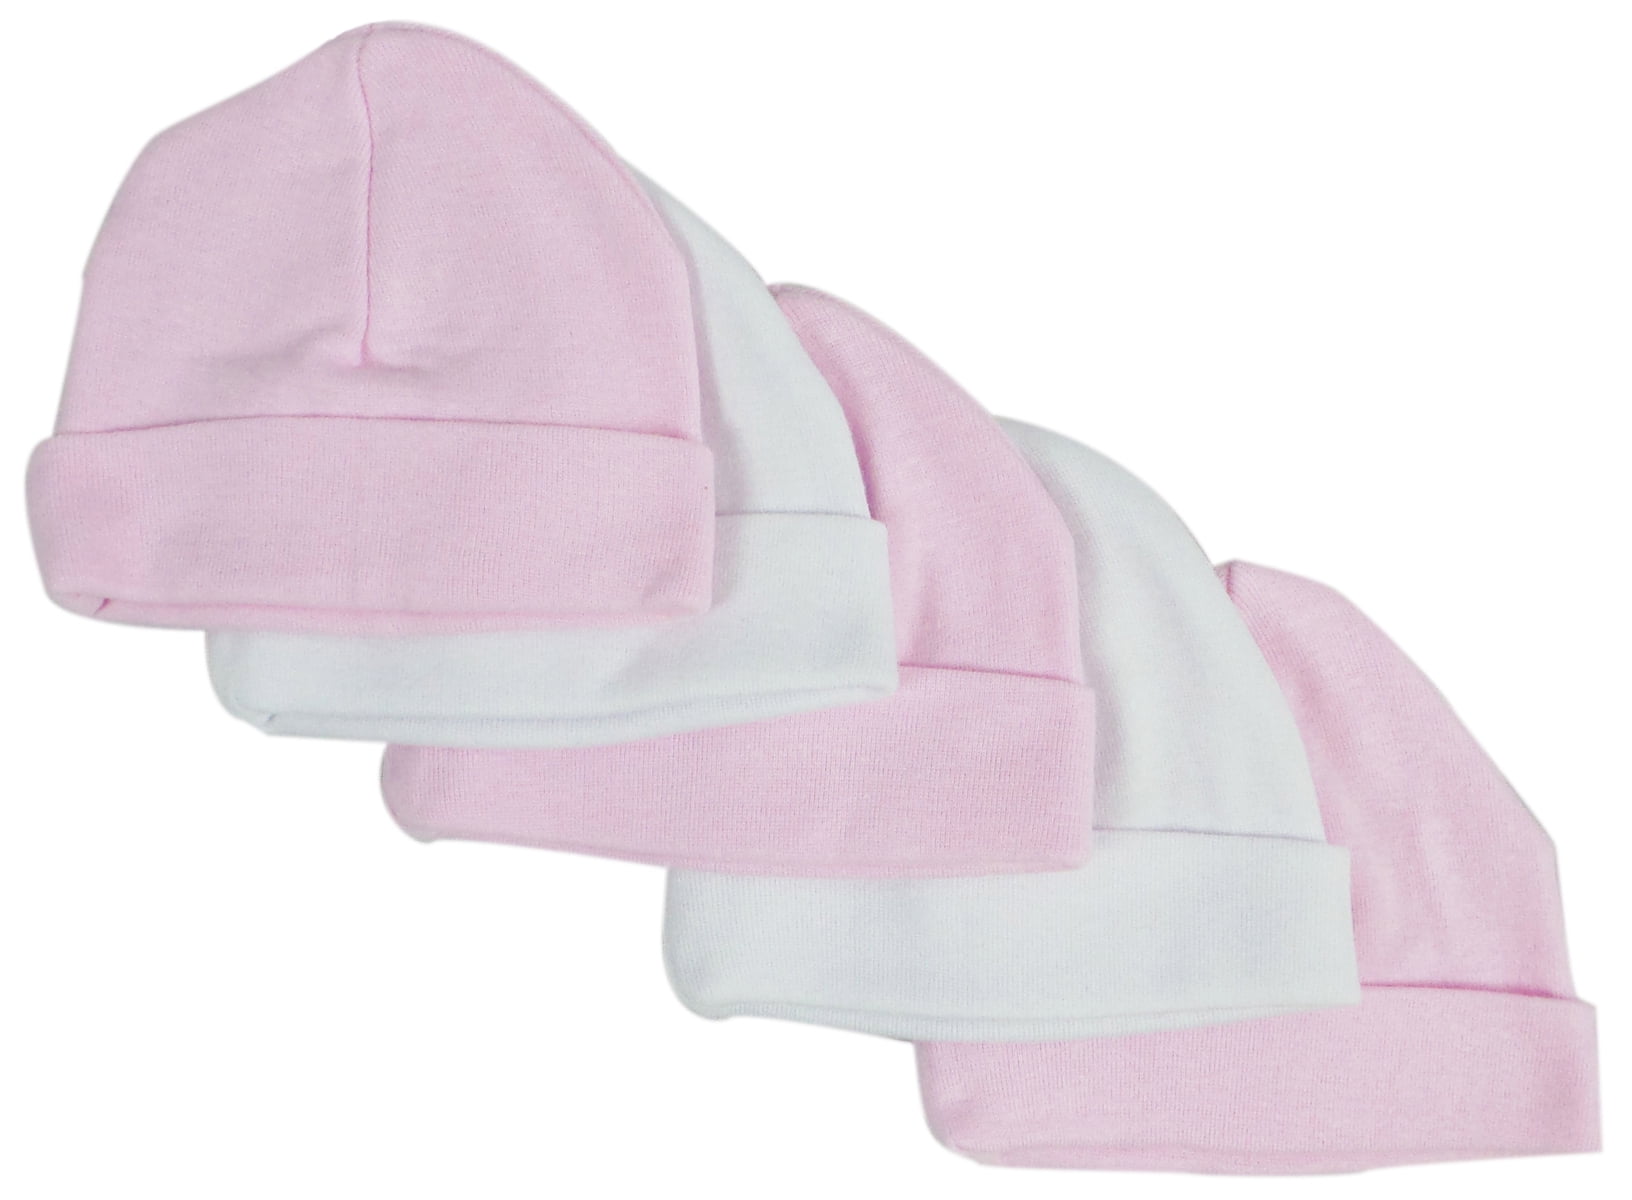 Baby Caps, Pink & White - Pack Of 5